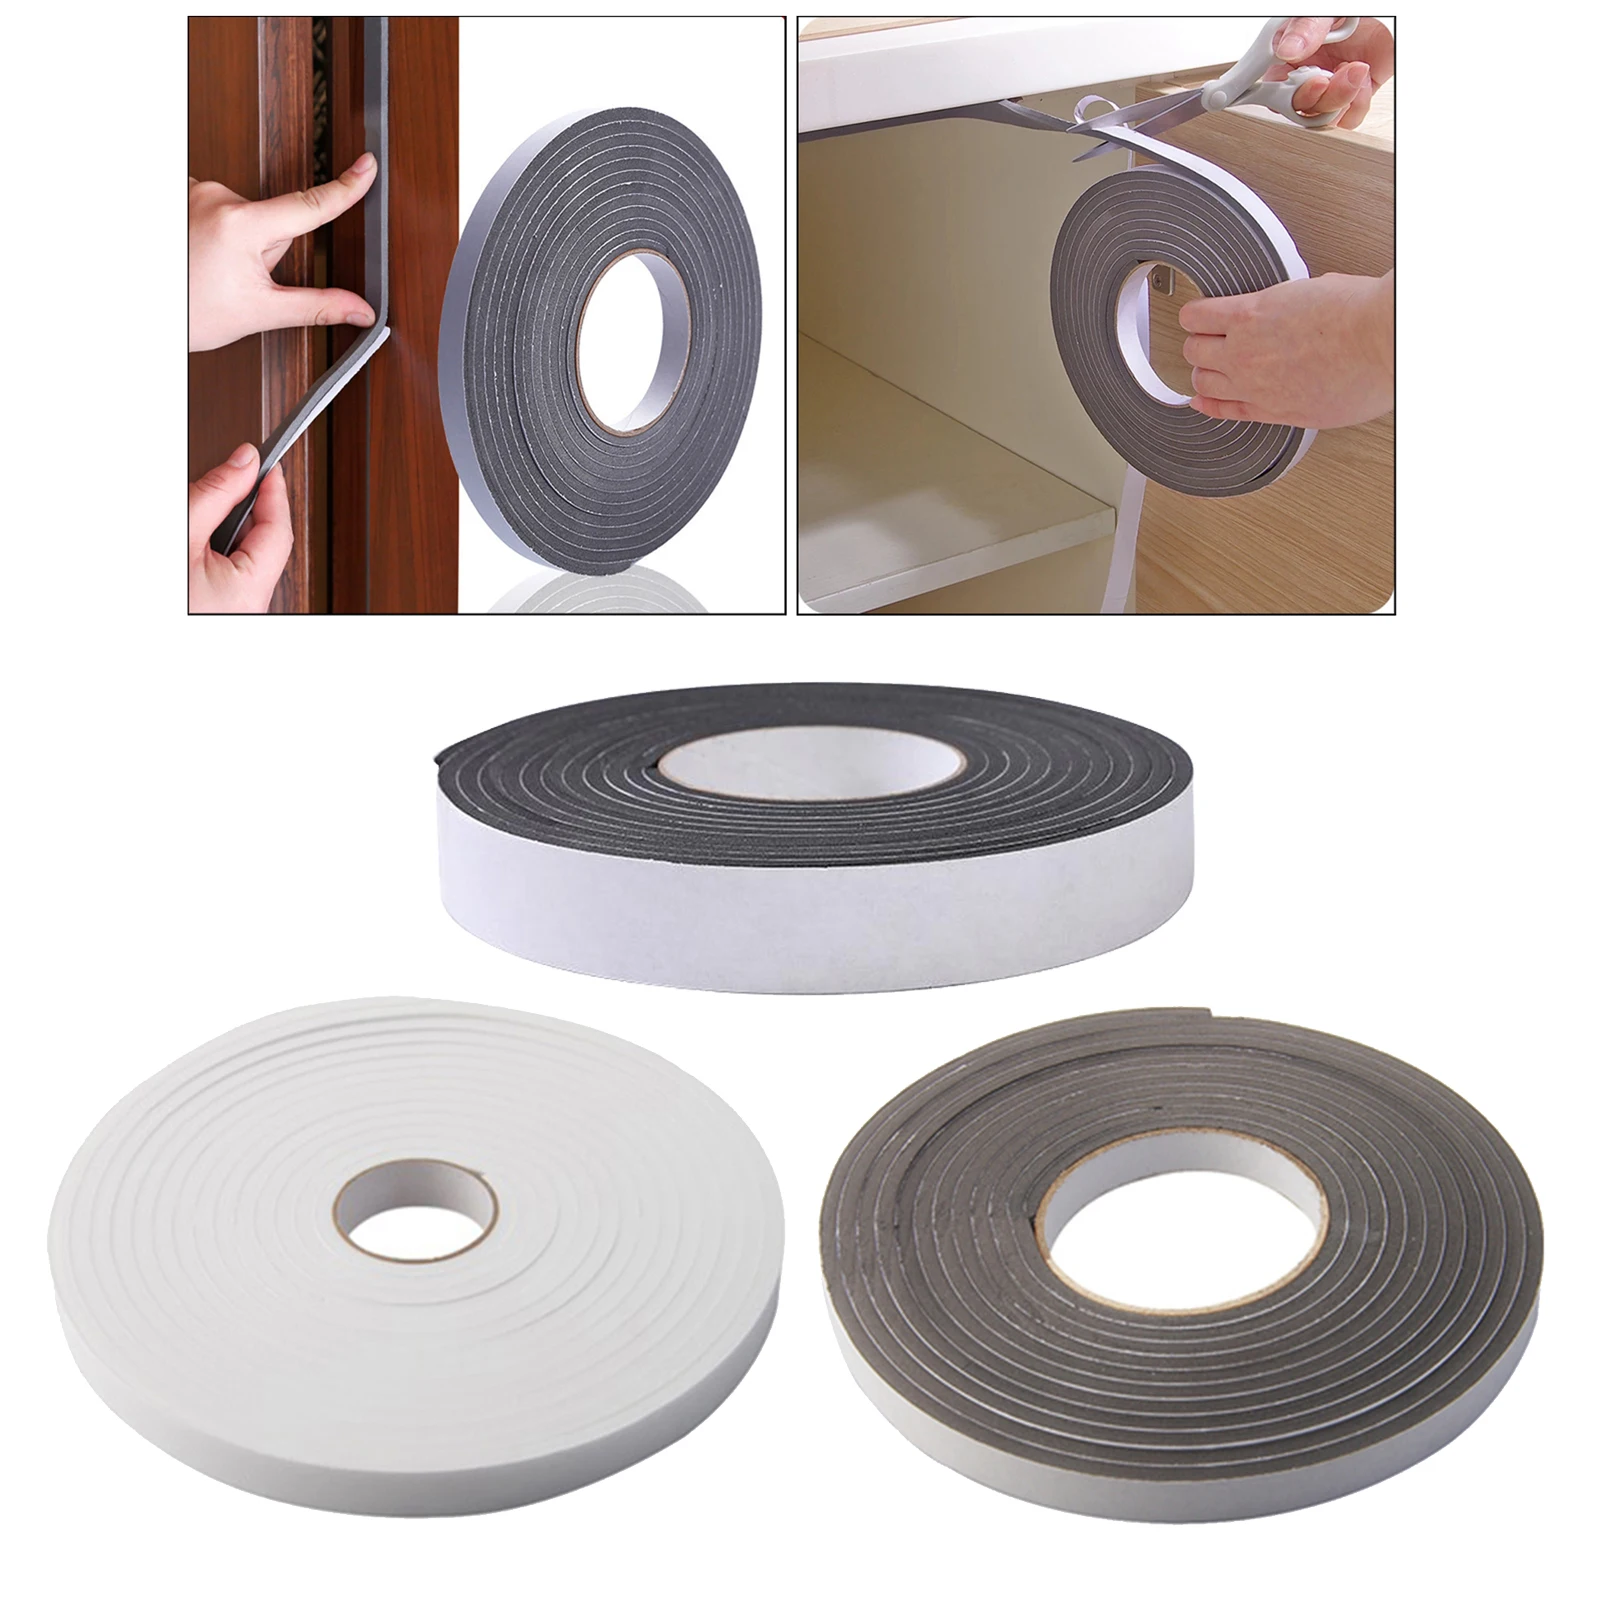 2 Rolls Foam Weather Seal Foam Seal Tape Strip High Density Stripping with Adhesive Backing 1.18Inch Width 16.5 Feet Long